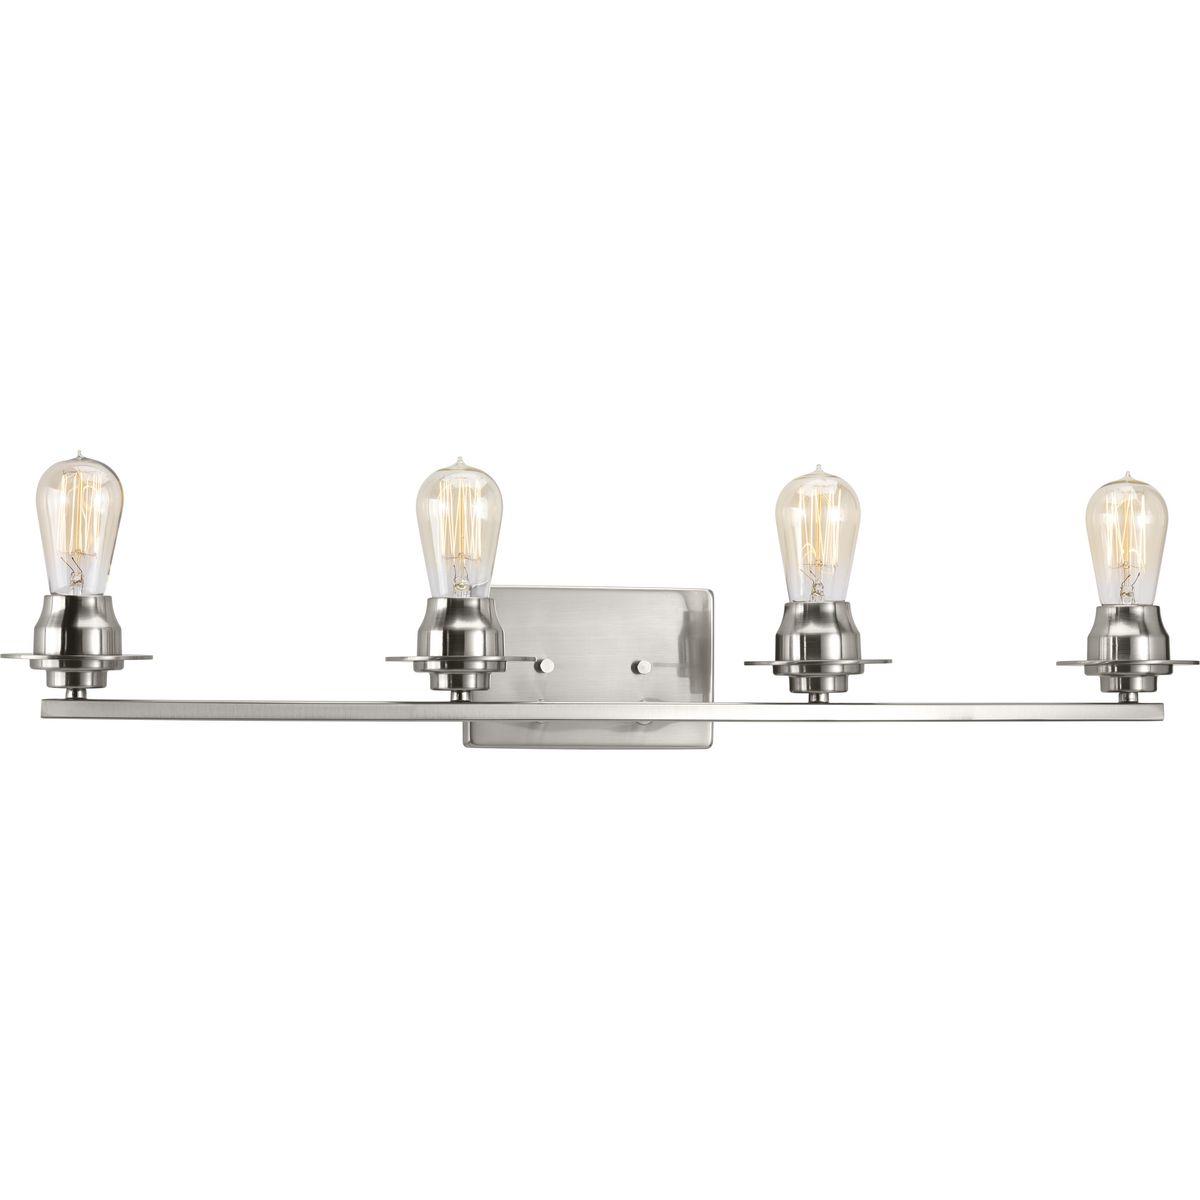 Hubbell P300011-009 A new category of vintage modern fixtures takes center stage with this four-light bath & vanity fixture from one of our Design Series collections. Delicate details in a Brushed Nickel finish, create statement making focal pieces for a variety of interiors